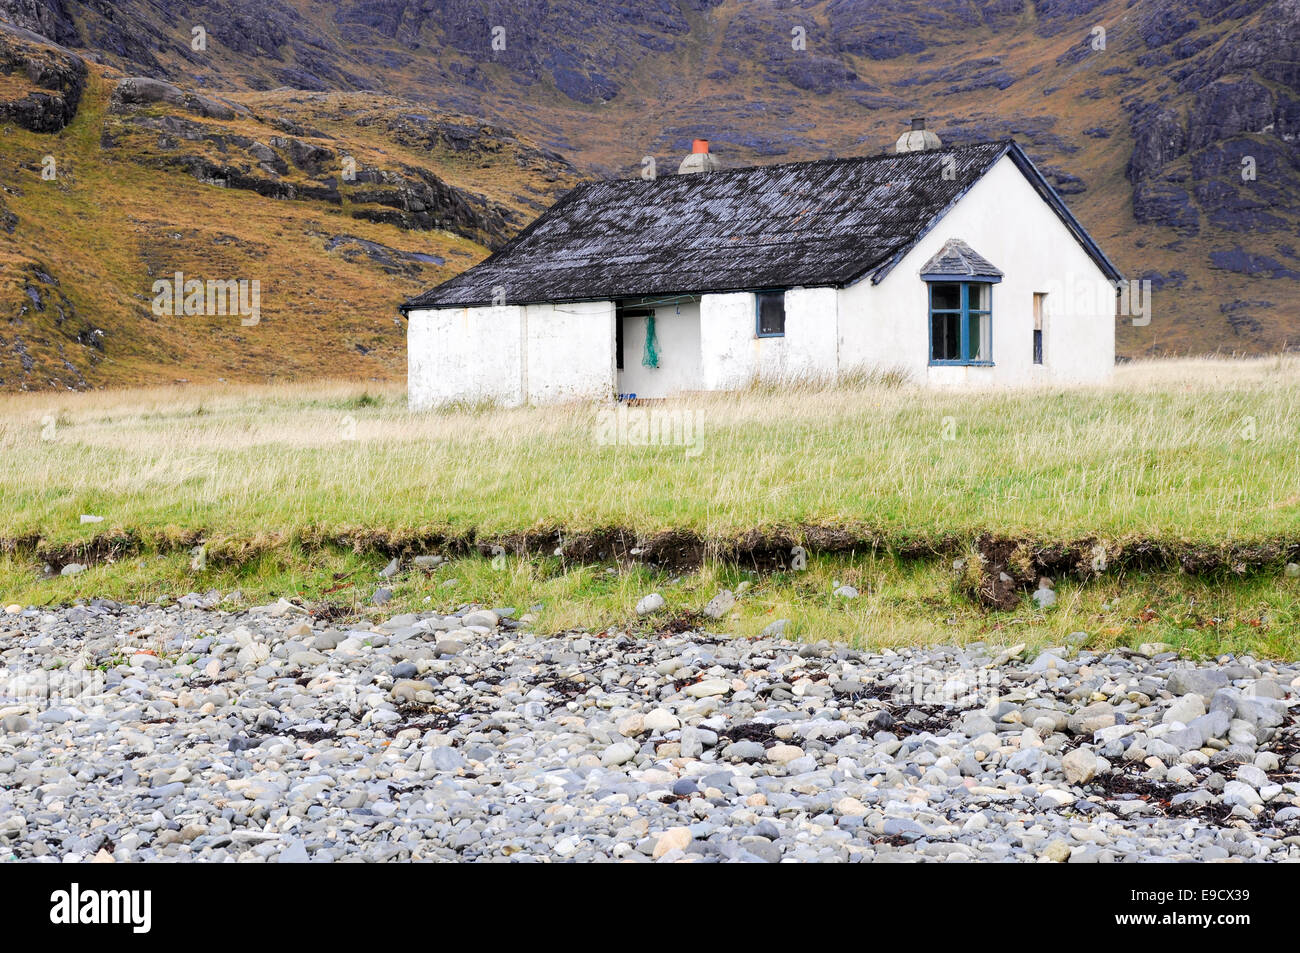 Bothy at Camasunary, a remote location near Elgol on the Isle of Skye. Autumn colours in the moorland landscape. Stock Photo